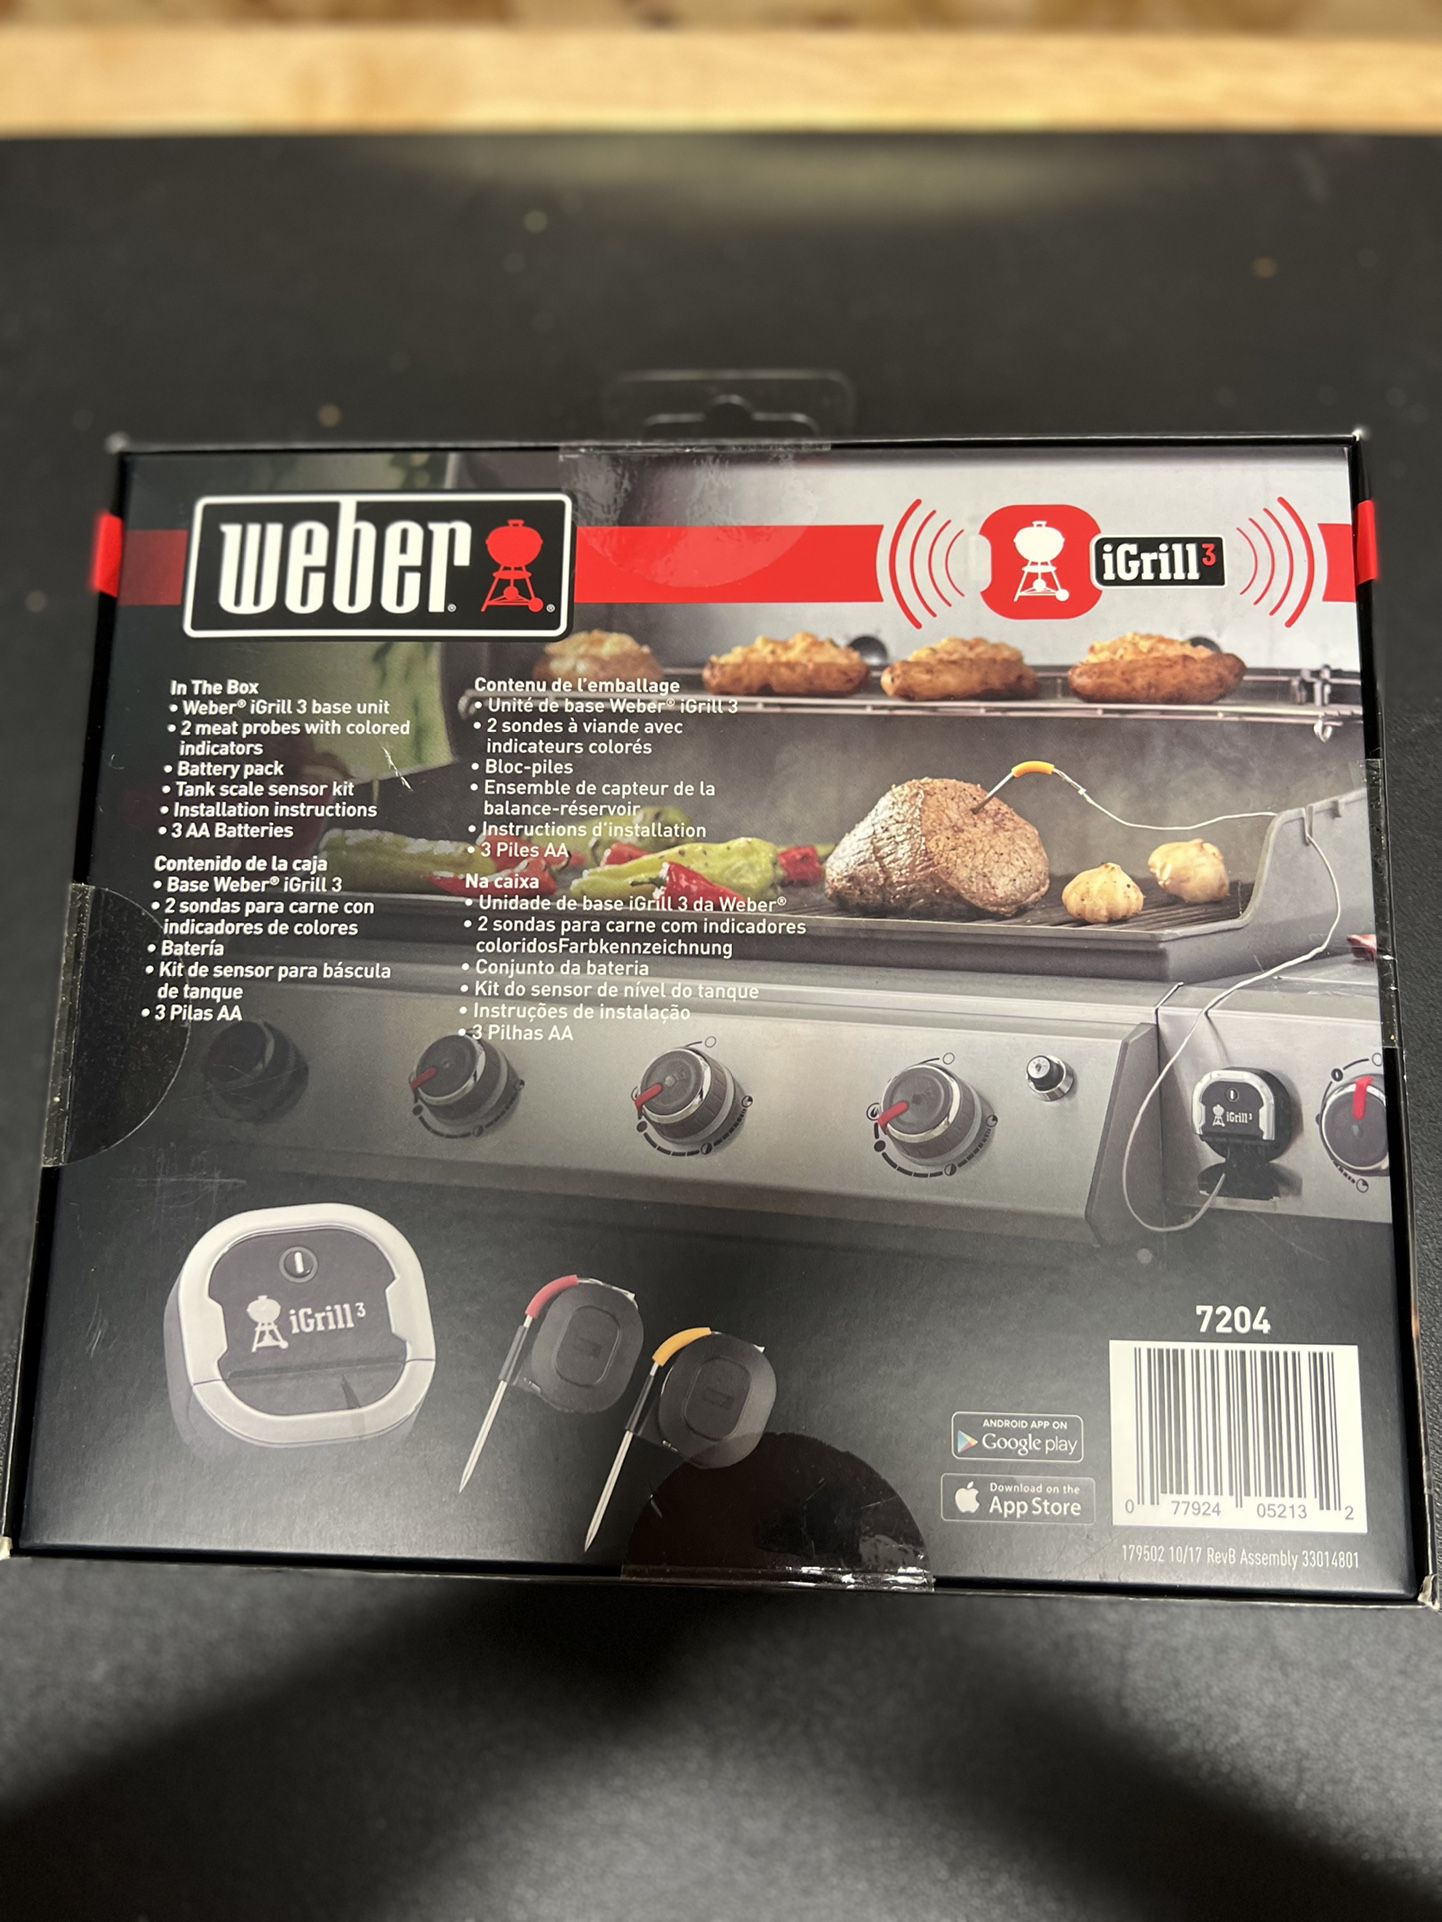 WEBER Igrill3 Thermometer 7204